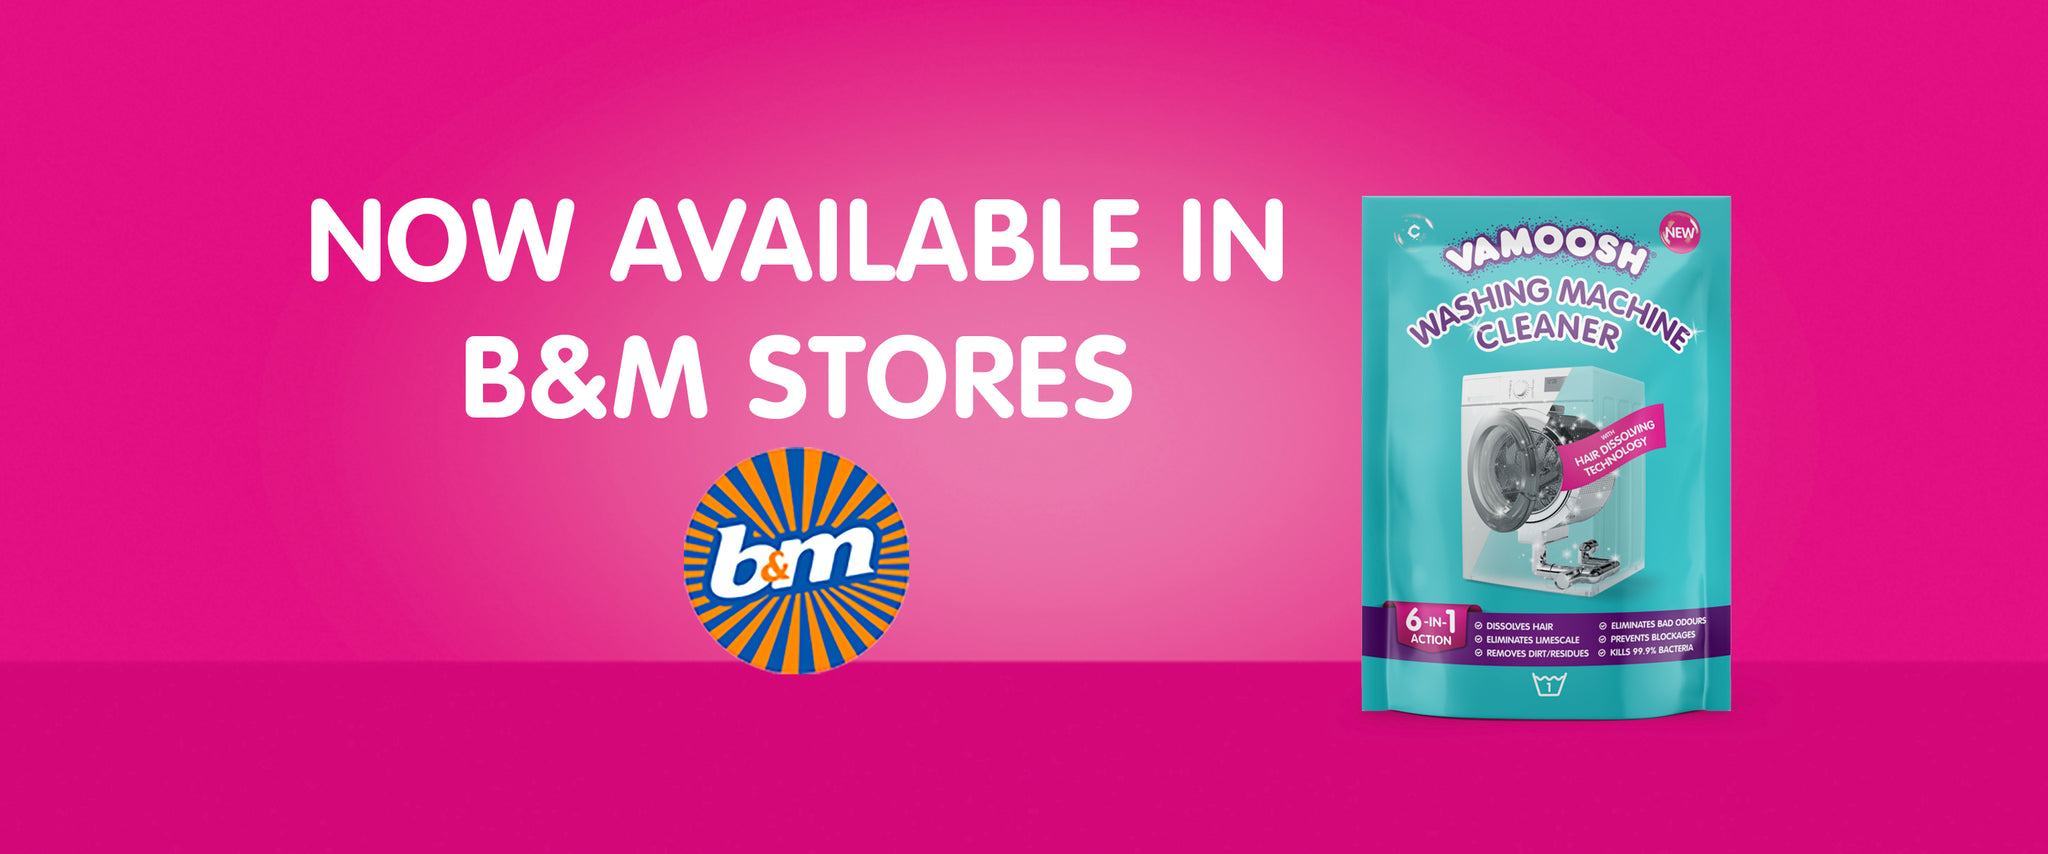 NEW PRODUCT IN B&M! Our Vamoosh washing machine cleaner has arrived!